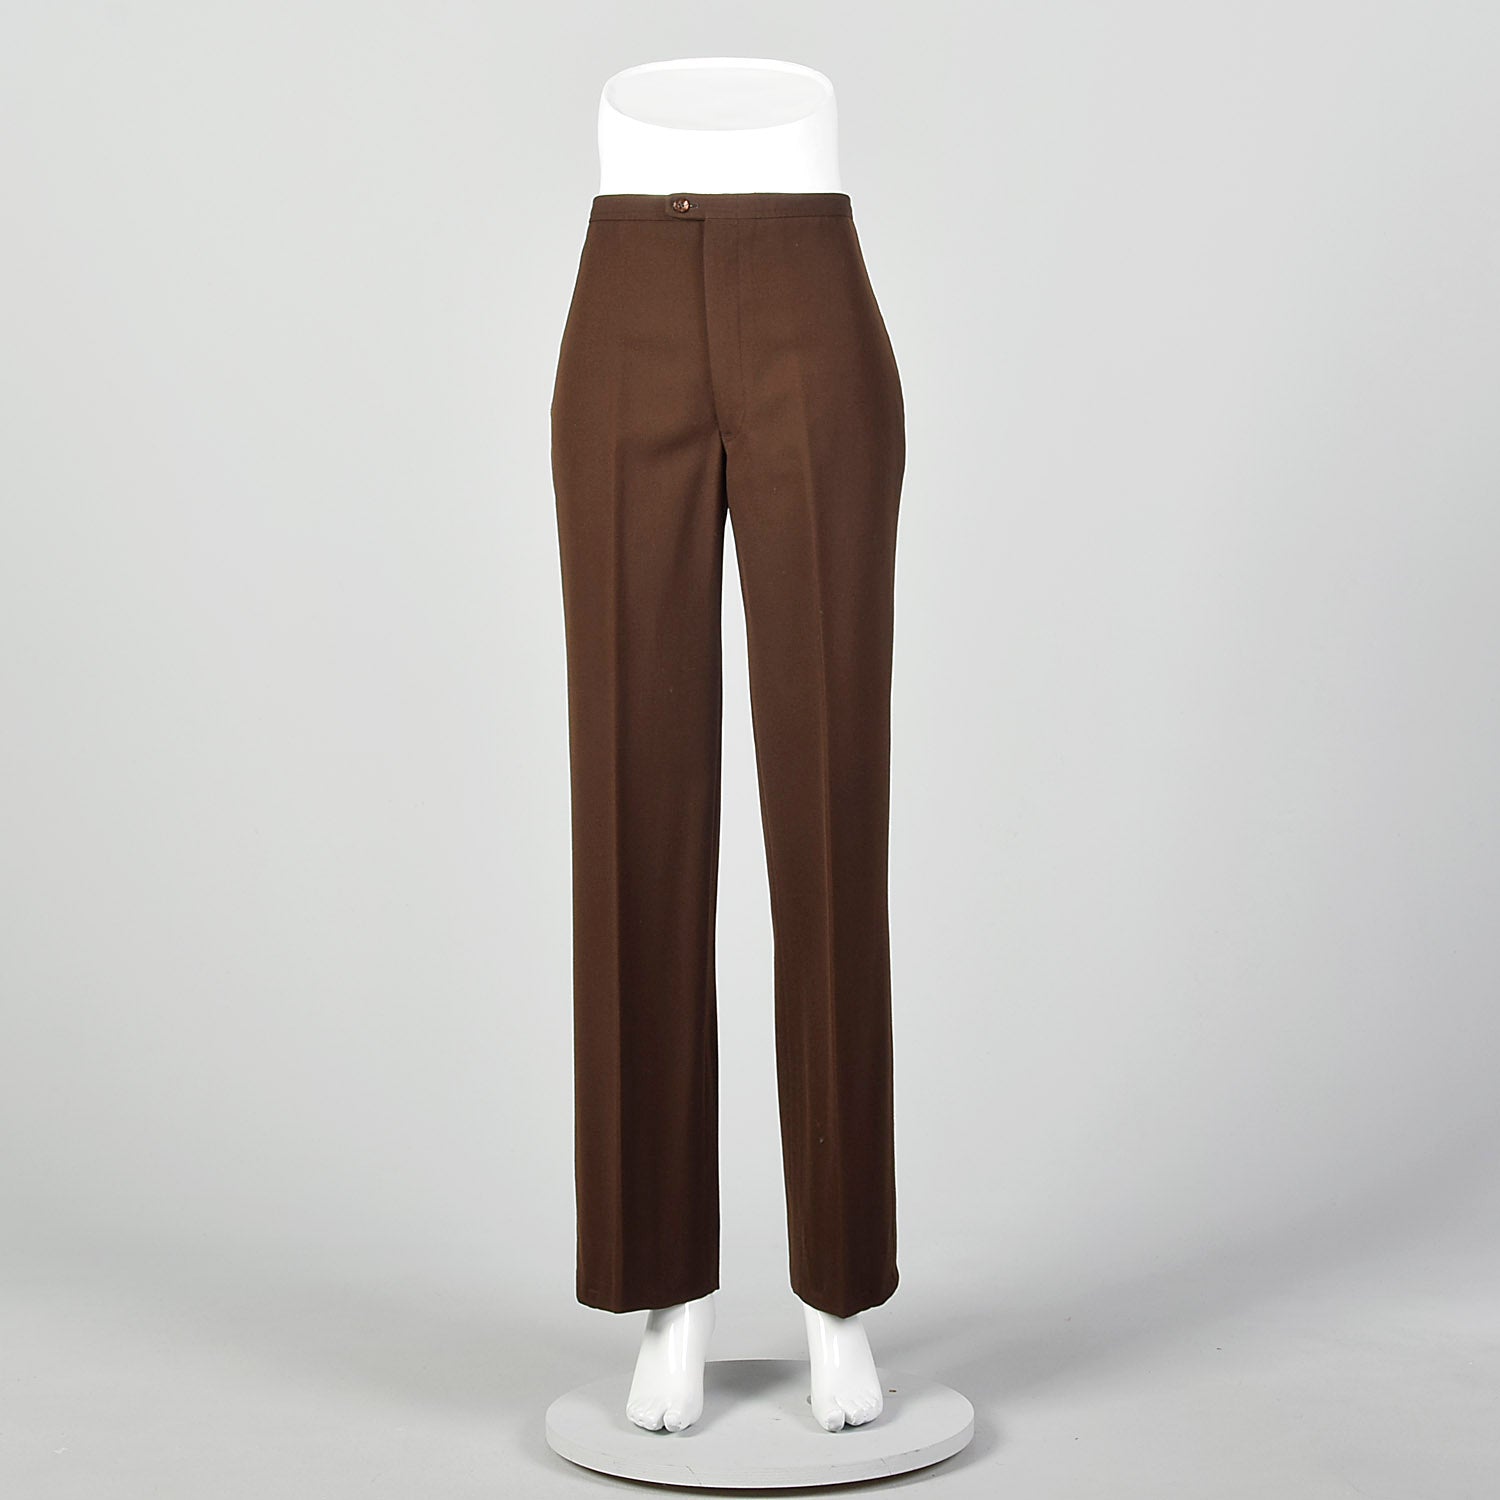 Small 1970s Brown Wide Leg Pants